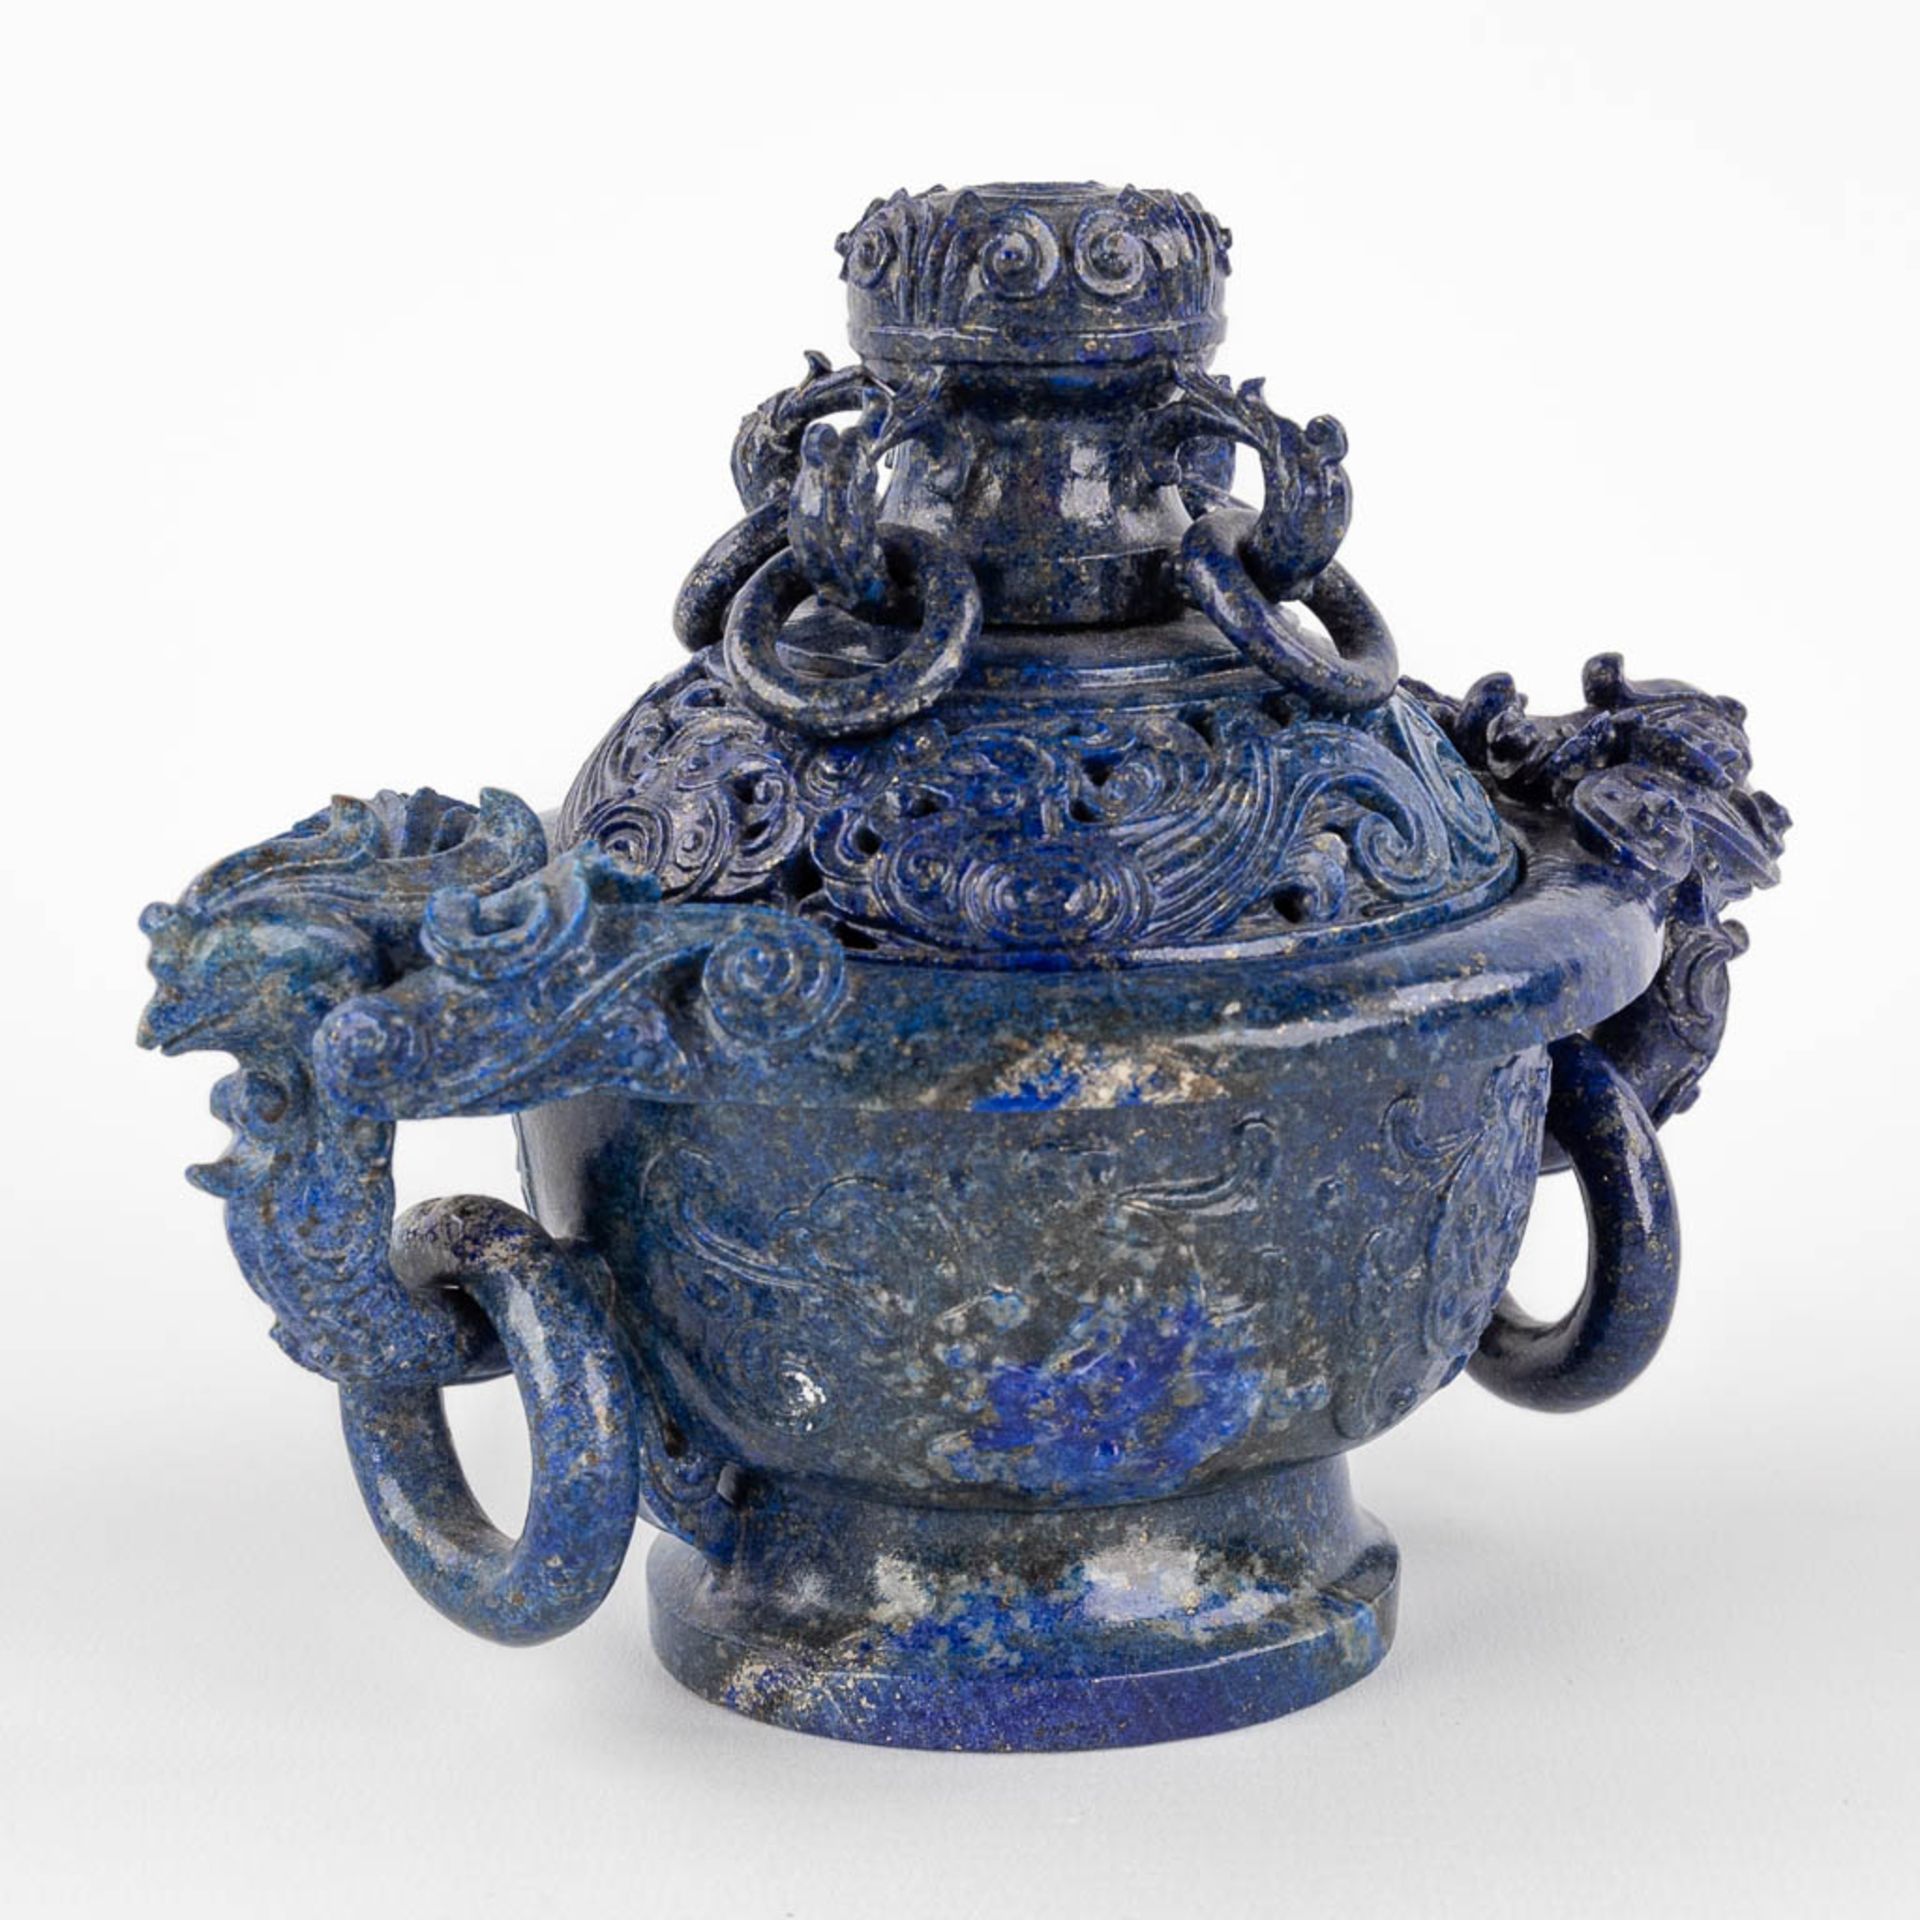 A Chinese censer, sculptured Lapis Lazuli, decorated with birds and flowers. (D:11 x W:17 x H:14 cm) - Image 3 of 11